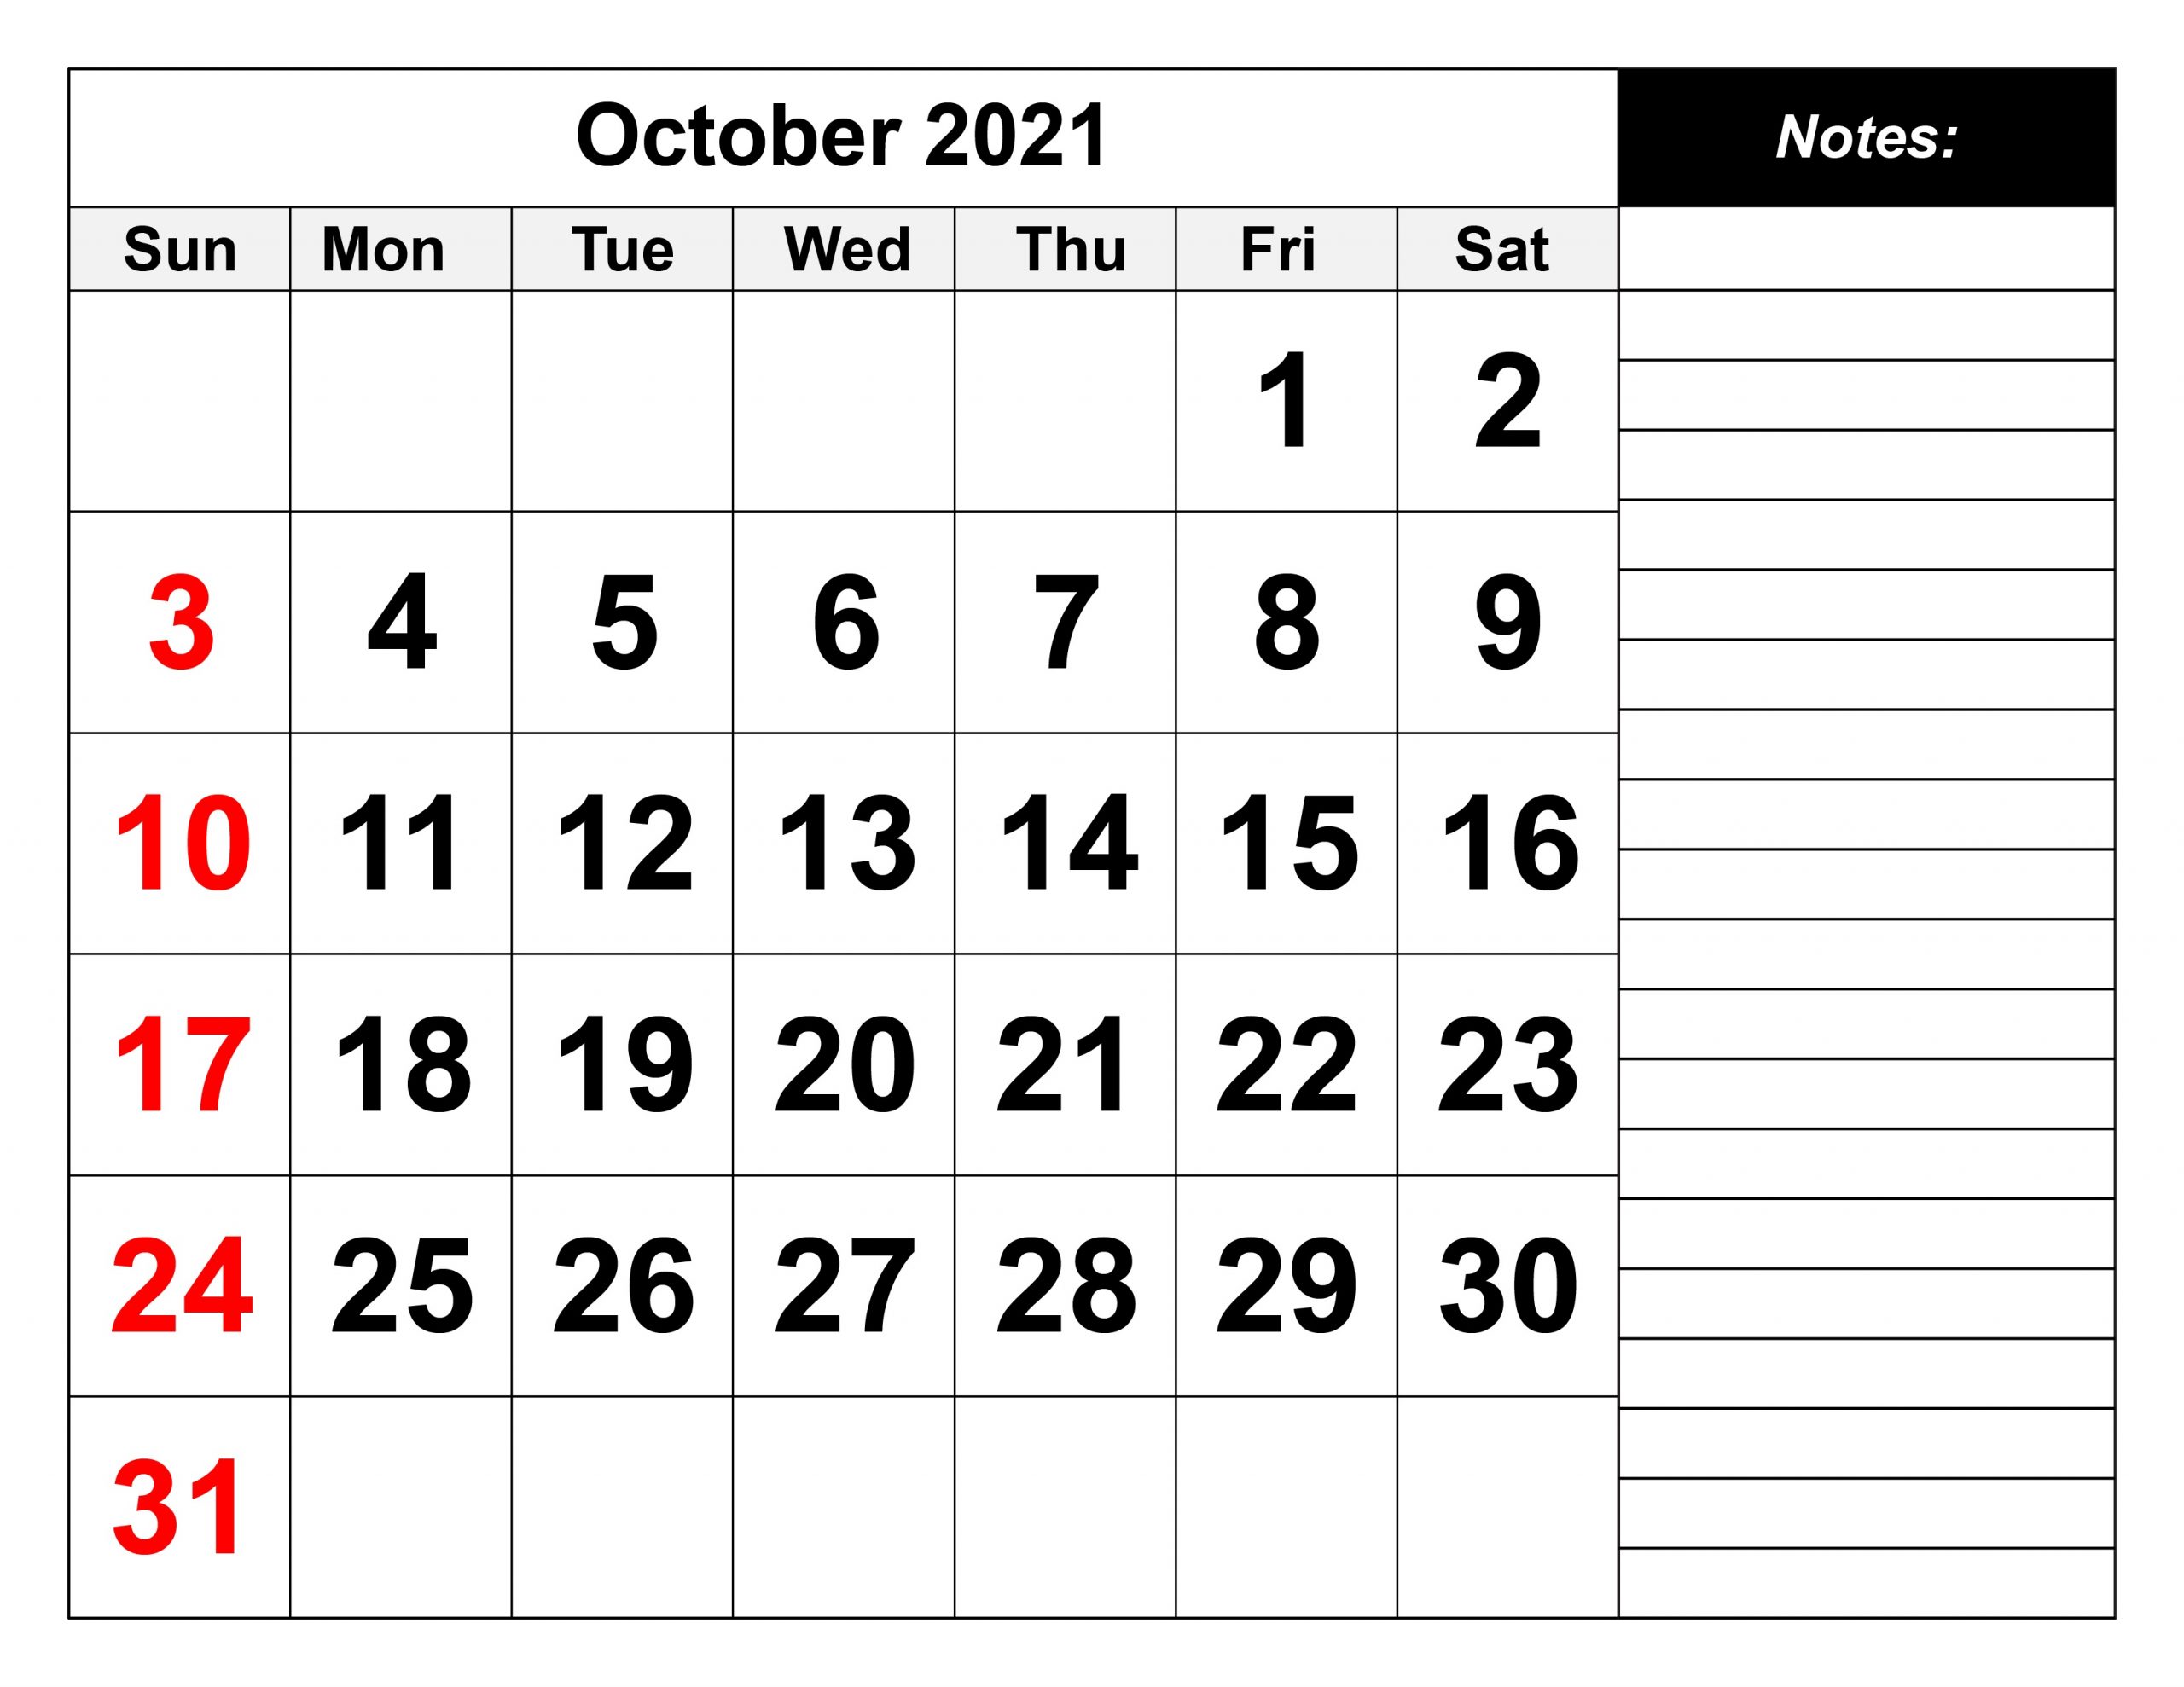 October 2021 Calendar Blank With Notes